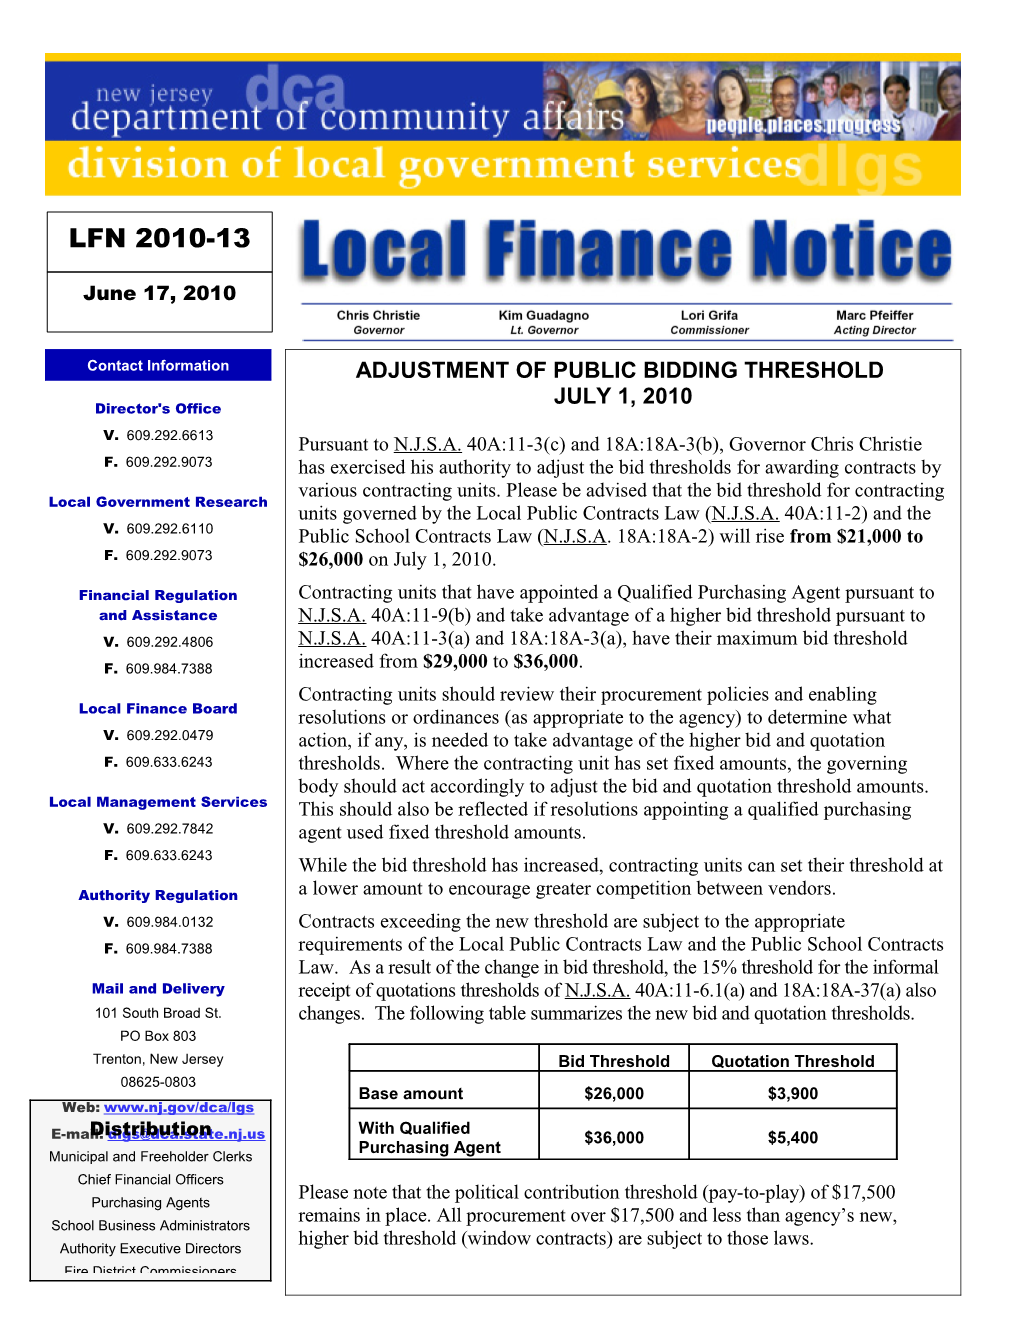 Local Finance Notice 2010-13 June 17, 2010 Page 2